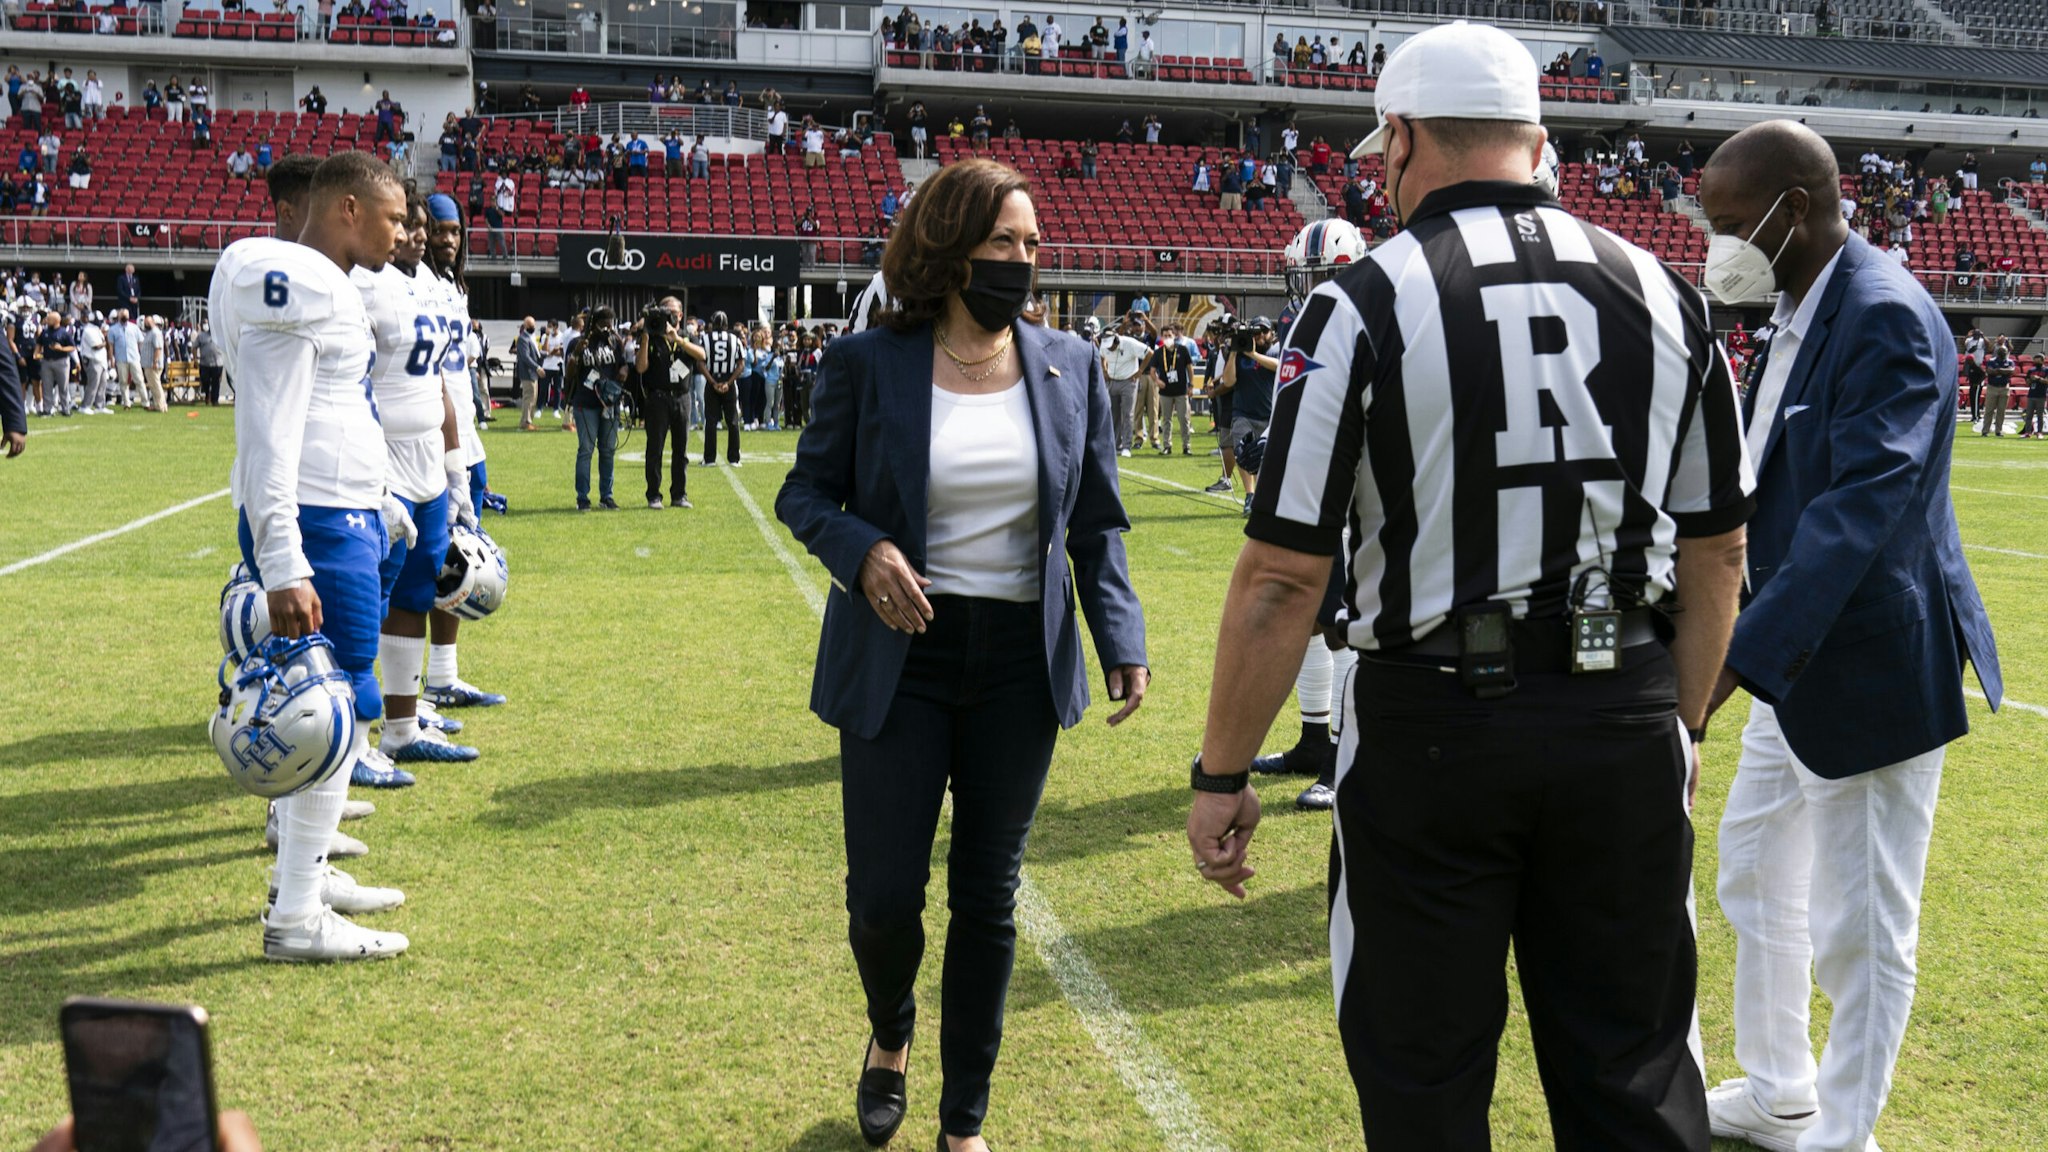 U.S. Vice President Kamala Harris, center, arrives to flip a coin ahead of the Howard University and Hampton University football game at Audi Field in Washington, D.C., U.S., on Saturday, Sept. 18, 2021. The two teams, both historically Black universities, are playing the first-ever Truth and Service Classic game hosted in partnership with Events DC.